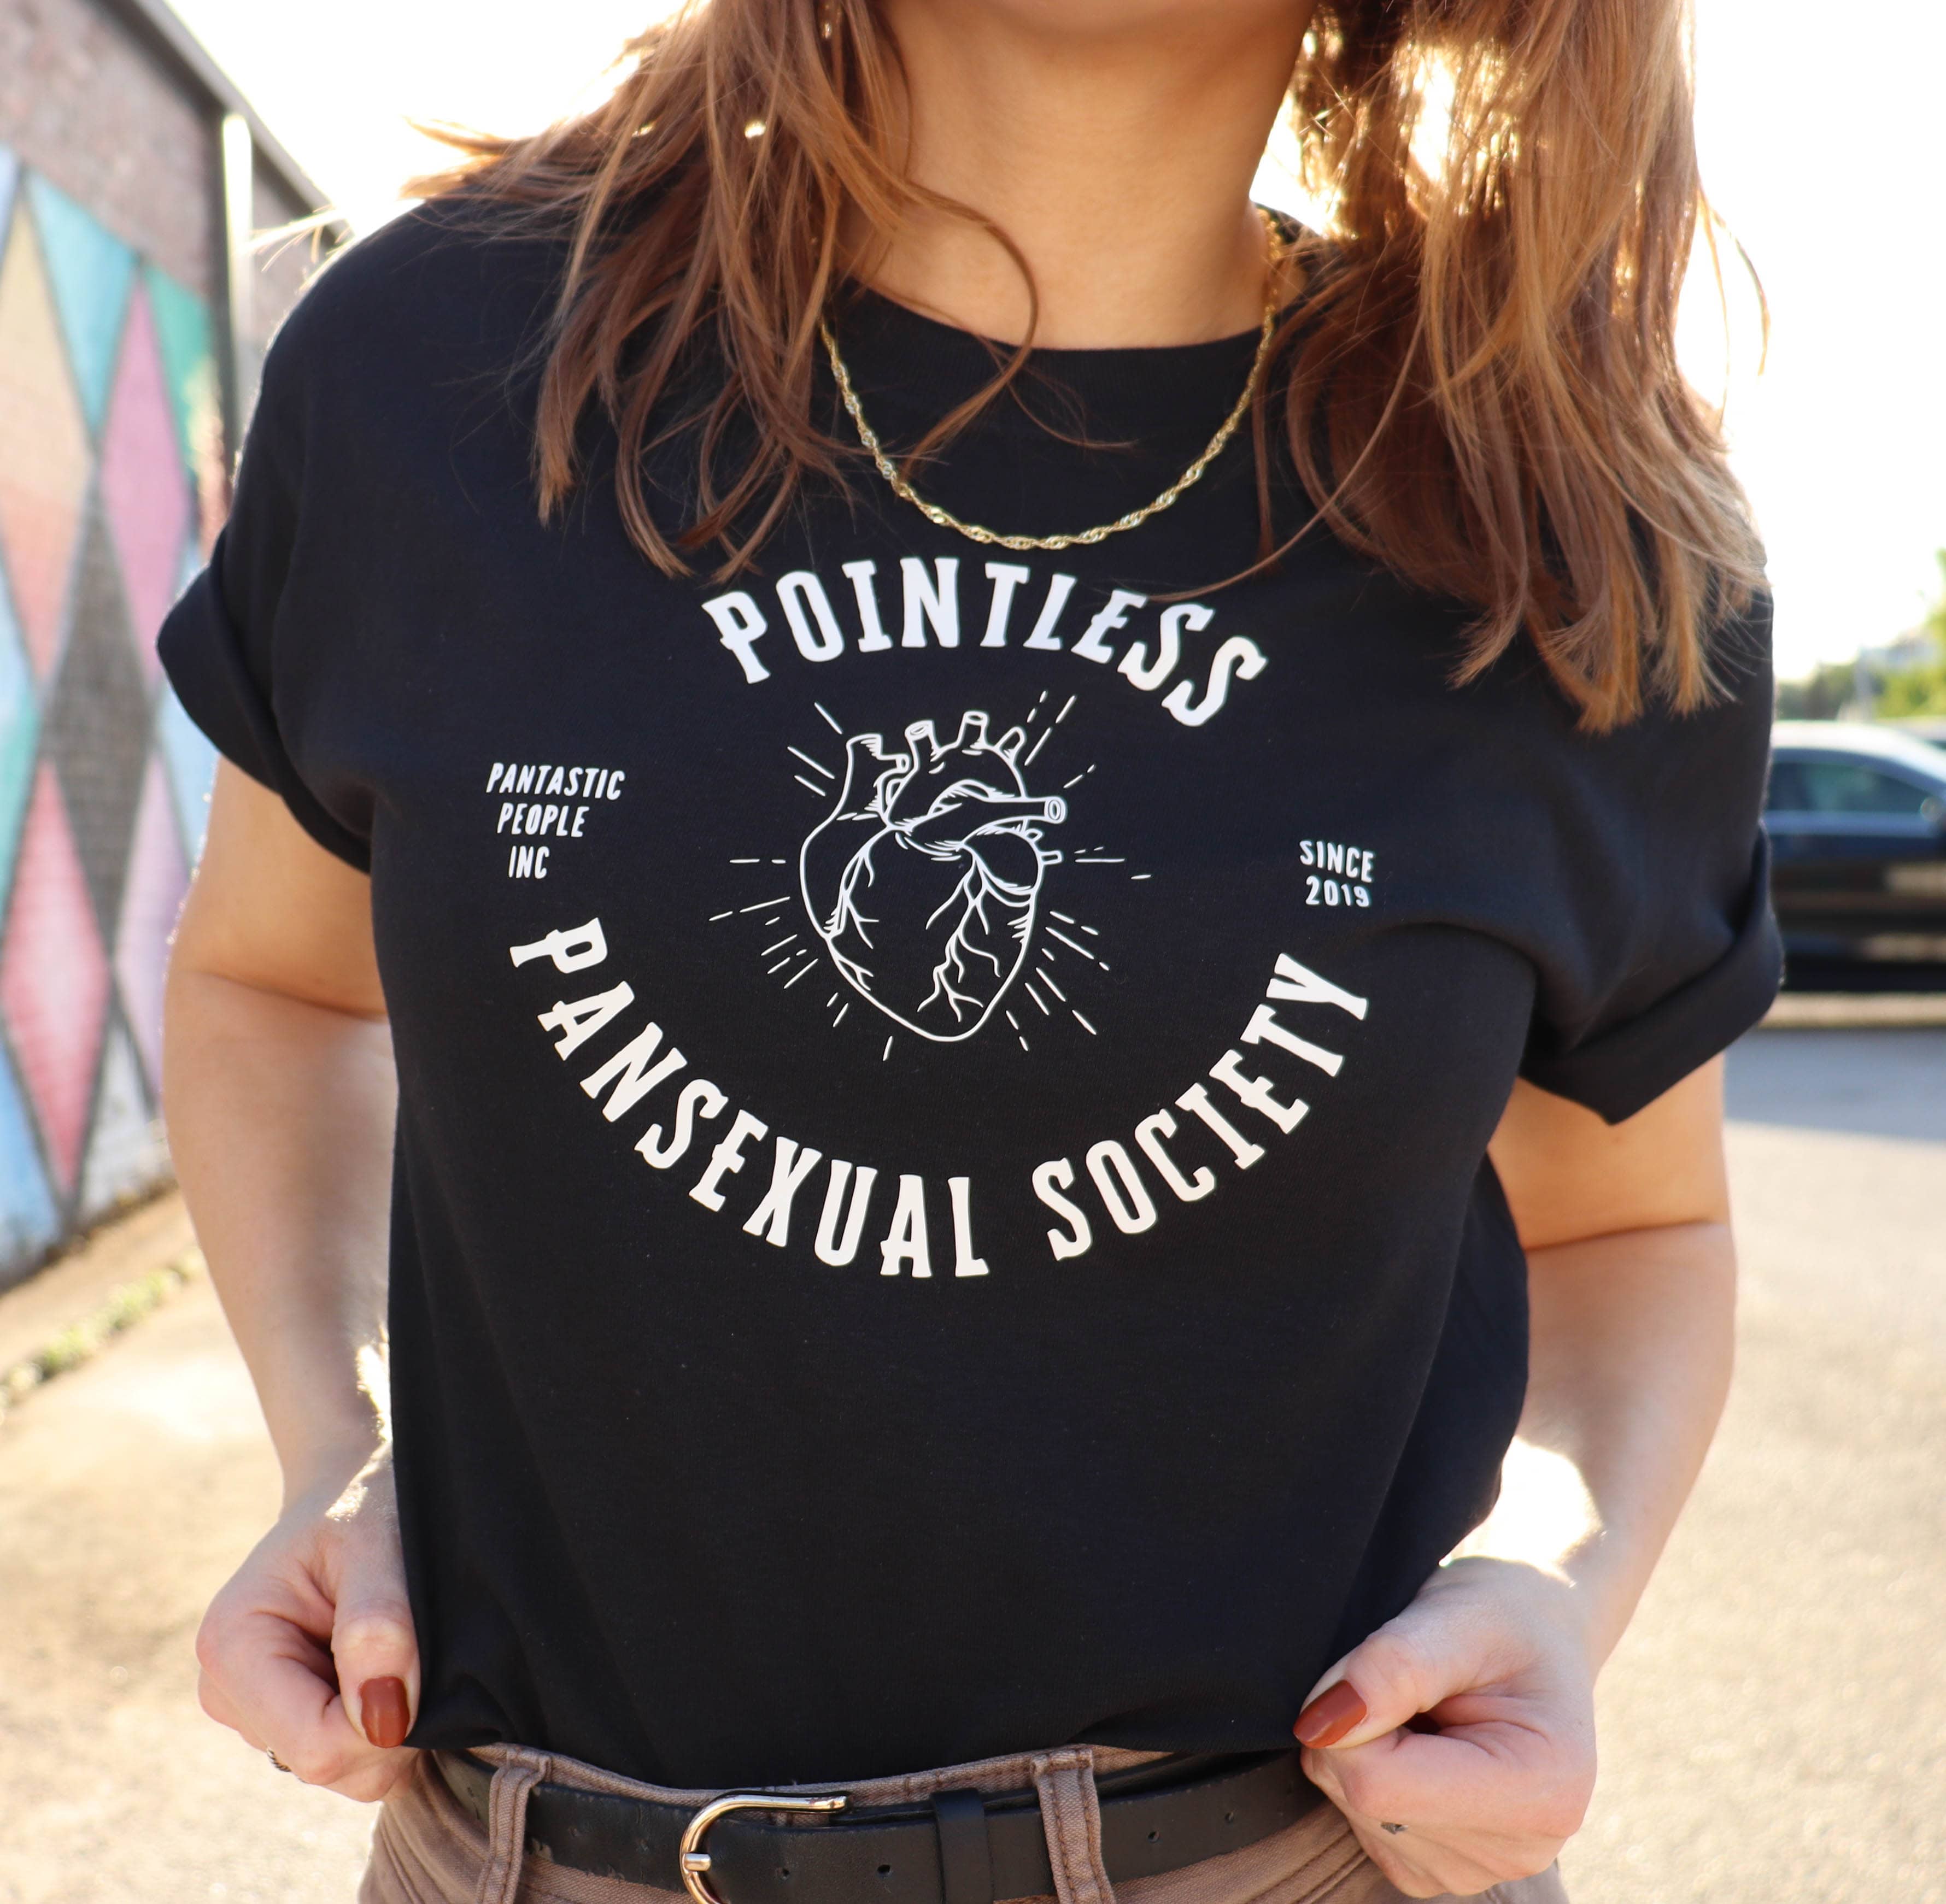 Pointless Pansexual Society Club T-Shirt